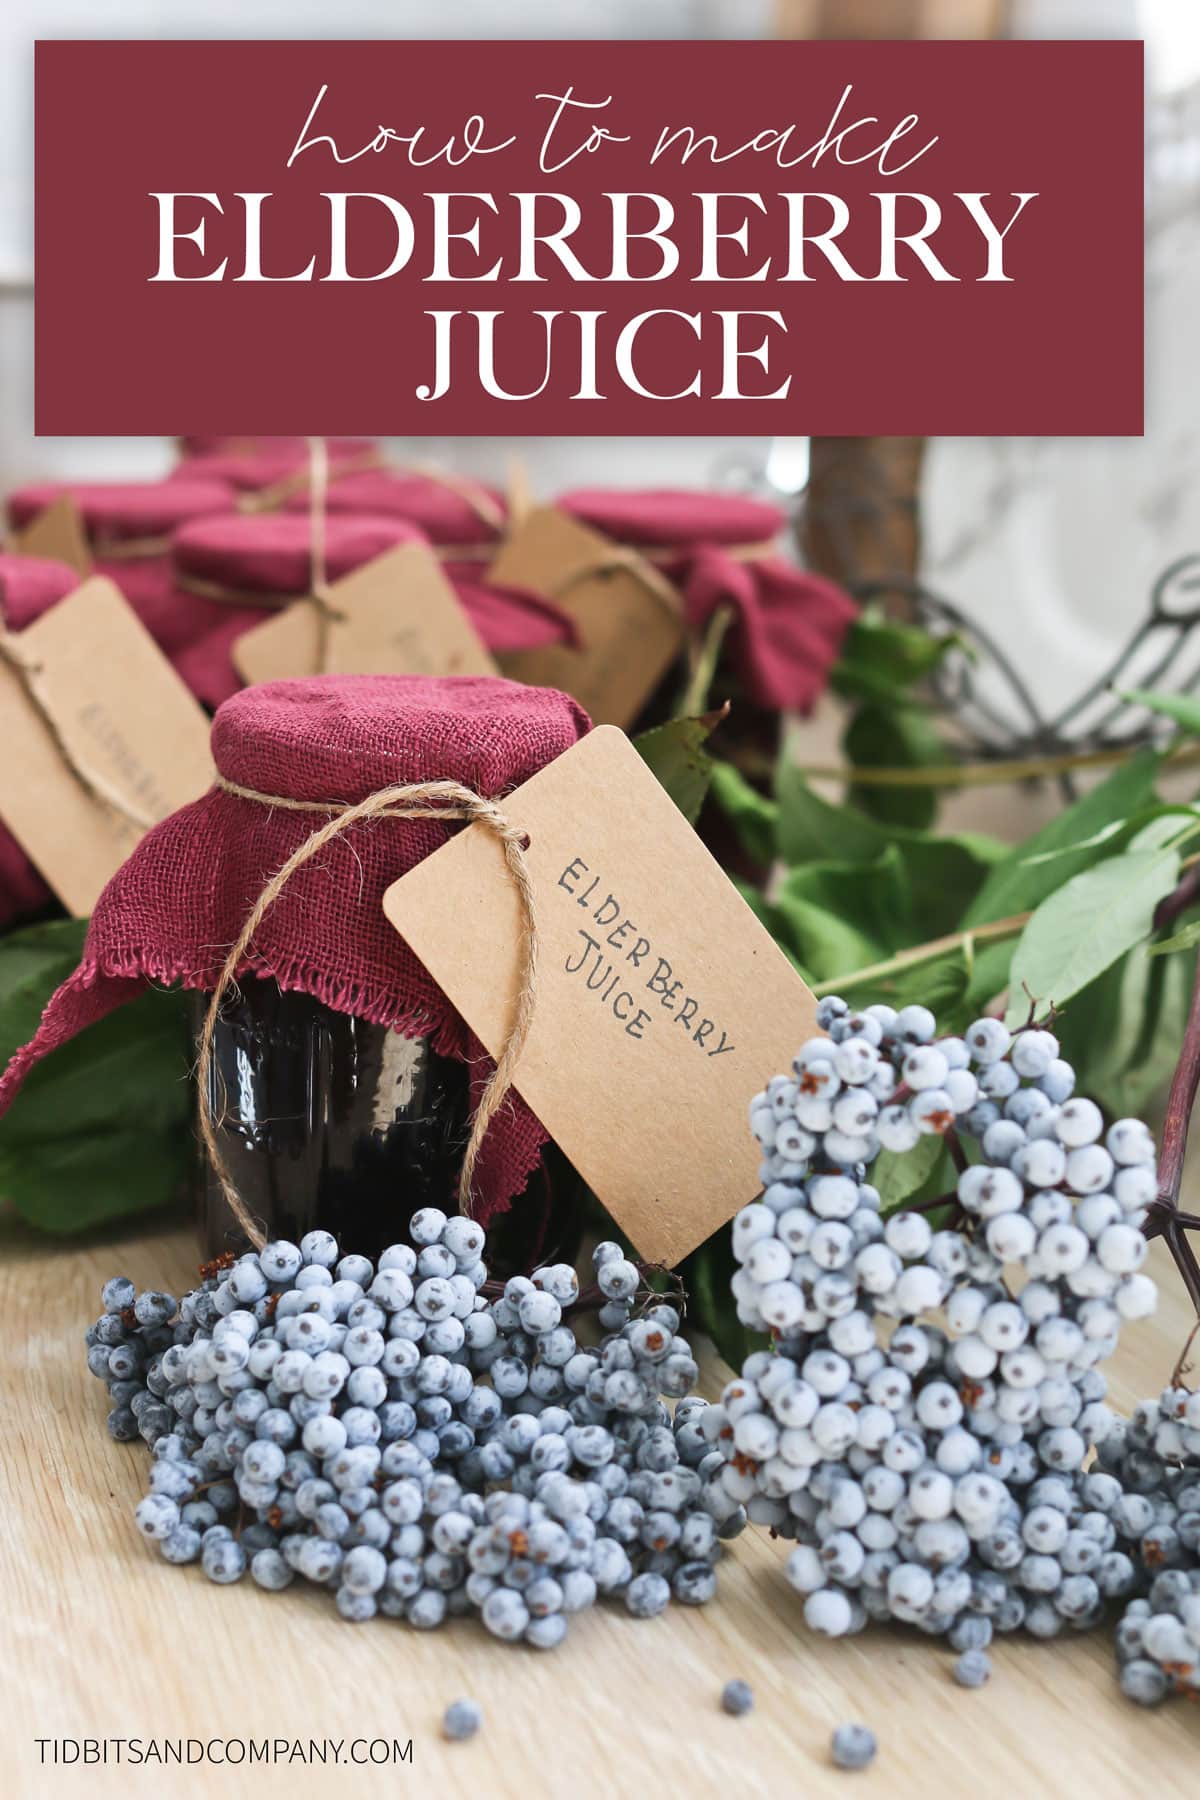 Text of "how to make elderberry juice" over a picture of elderberries and elderberry juice in bottles